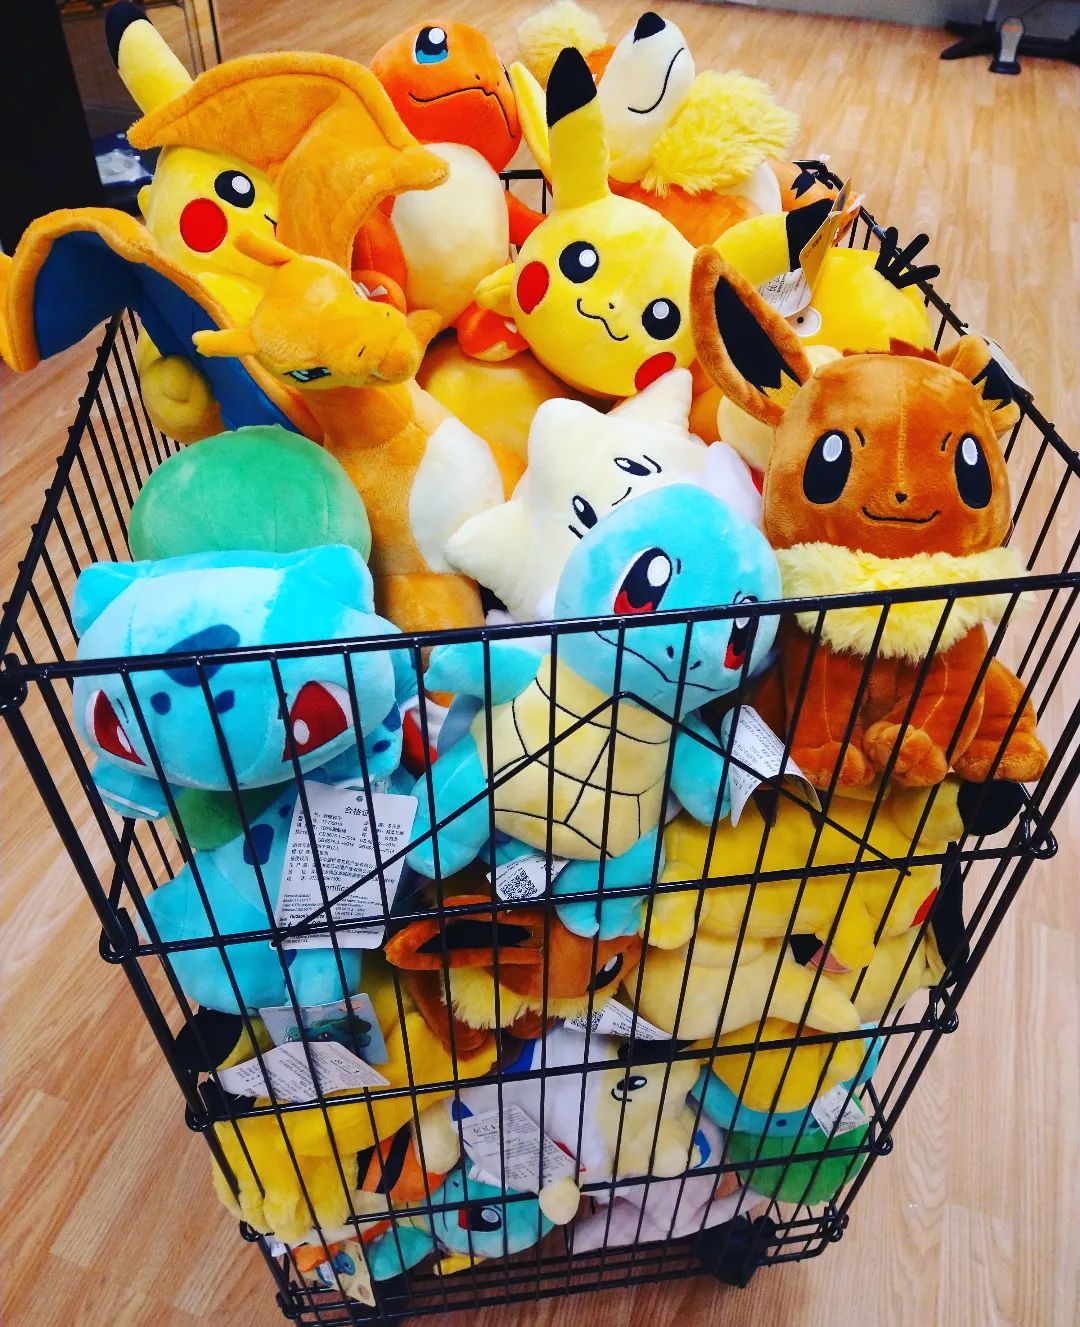 These pokemon need a good home! Grab your favorite (or catch em all!) At our Volusia Mall store today! 

#hudsonsvideogames #hudsonsvideogamesvolusia #hudsonsvideogamesdaytona #pokemon #pikachu #squirtle #bulbasaur #charmander #charizard #mew #gengar #lapras #growlithe #pichu #togepi #eevee #catchemall #plush #toys #videogames #retrogames  (at Hudson’s Video Games - Volusia Mall)
https://www.instagram.com/p/CghccDQLkaH/?igshid=NGJjMDIxMWI=